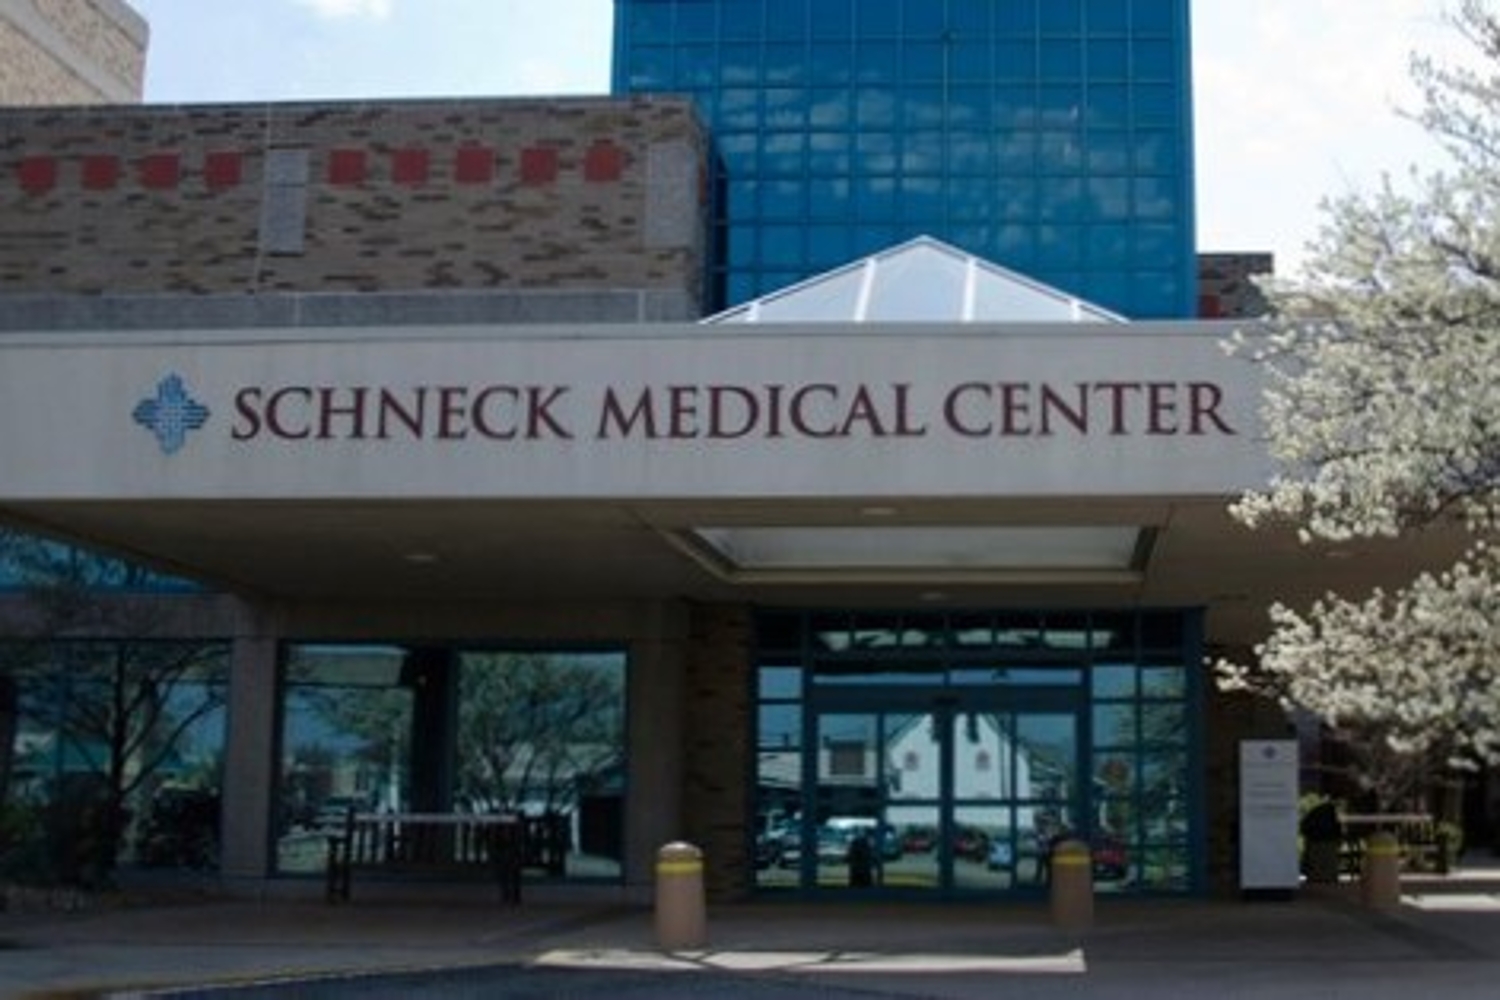 The entrance to Schneck Medical Center in Seymour.